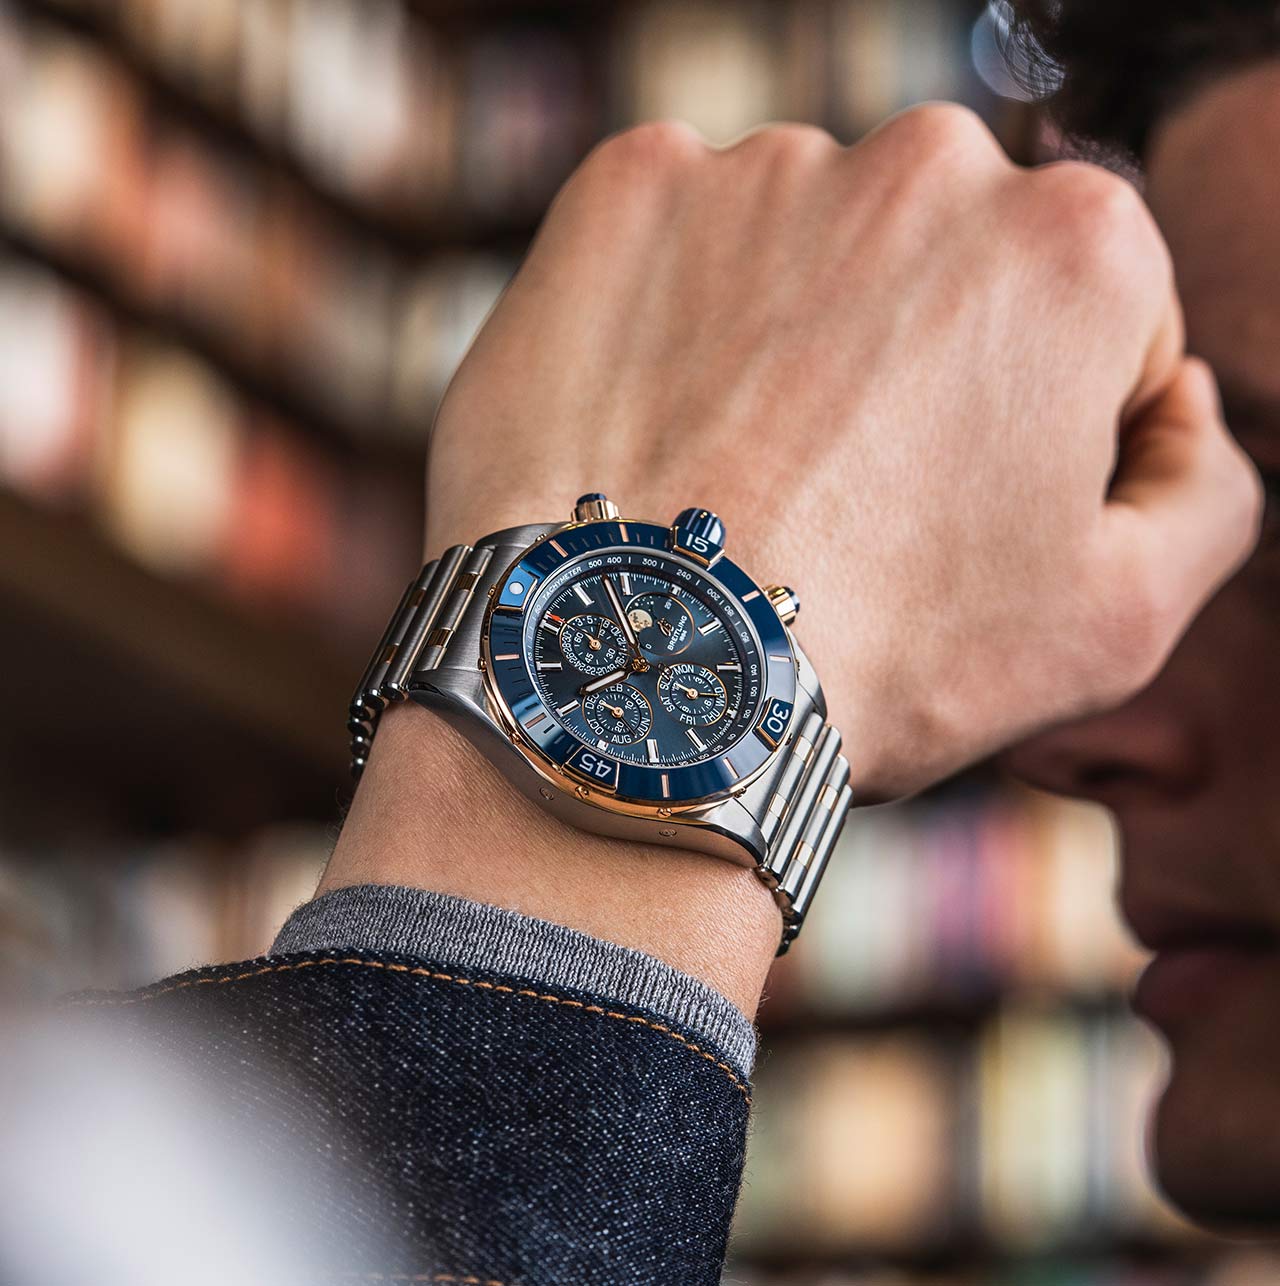 Breitling - Super Chronomat | Time and Watches | The watch blog